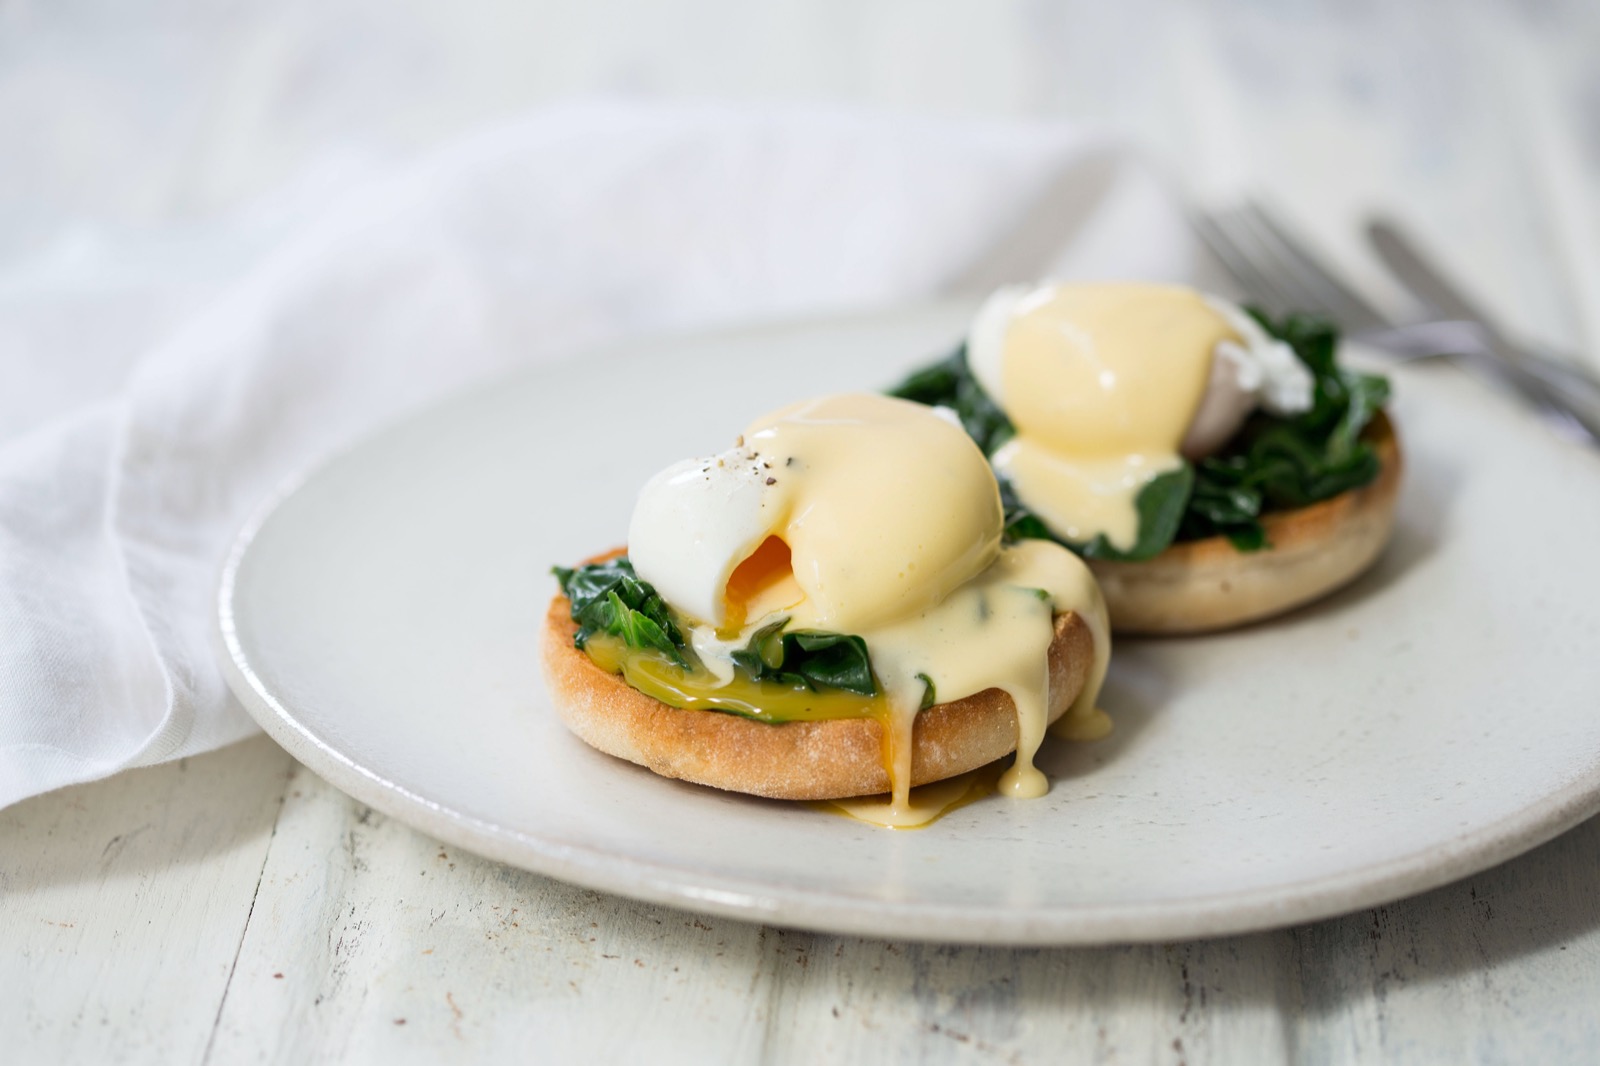 7 in 10 People Can’t Get Over 15/20 on This All-Rounded Trivia Challenge — Can You Impress Me? Eggs Florentine